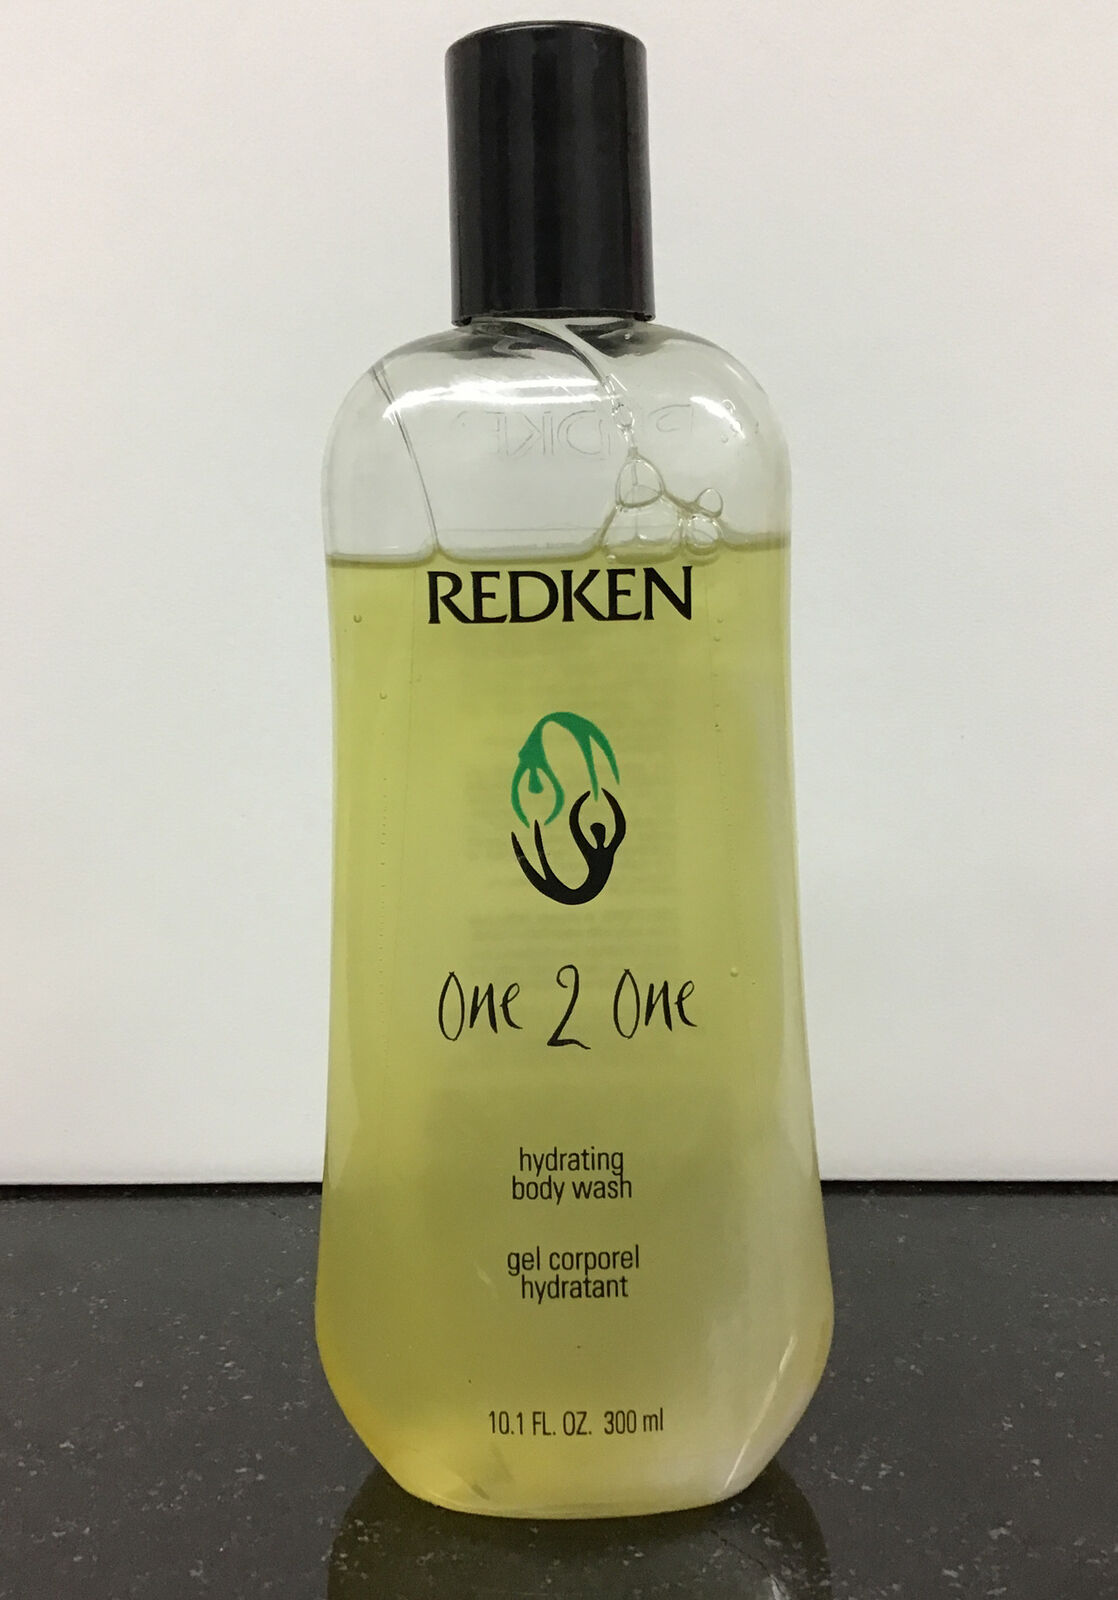 Redken one 2 one hydrating body wash 10.1 fl oz, Condition As Pictured  85% Ful